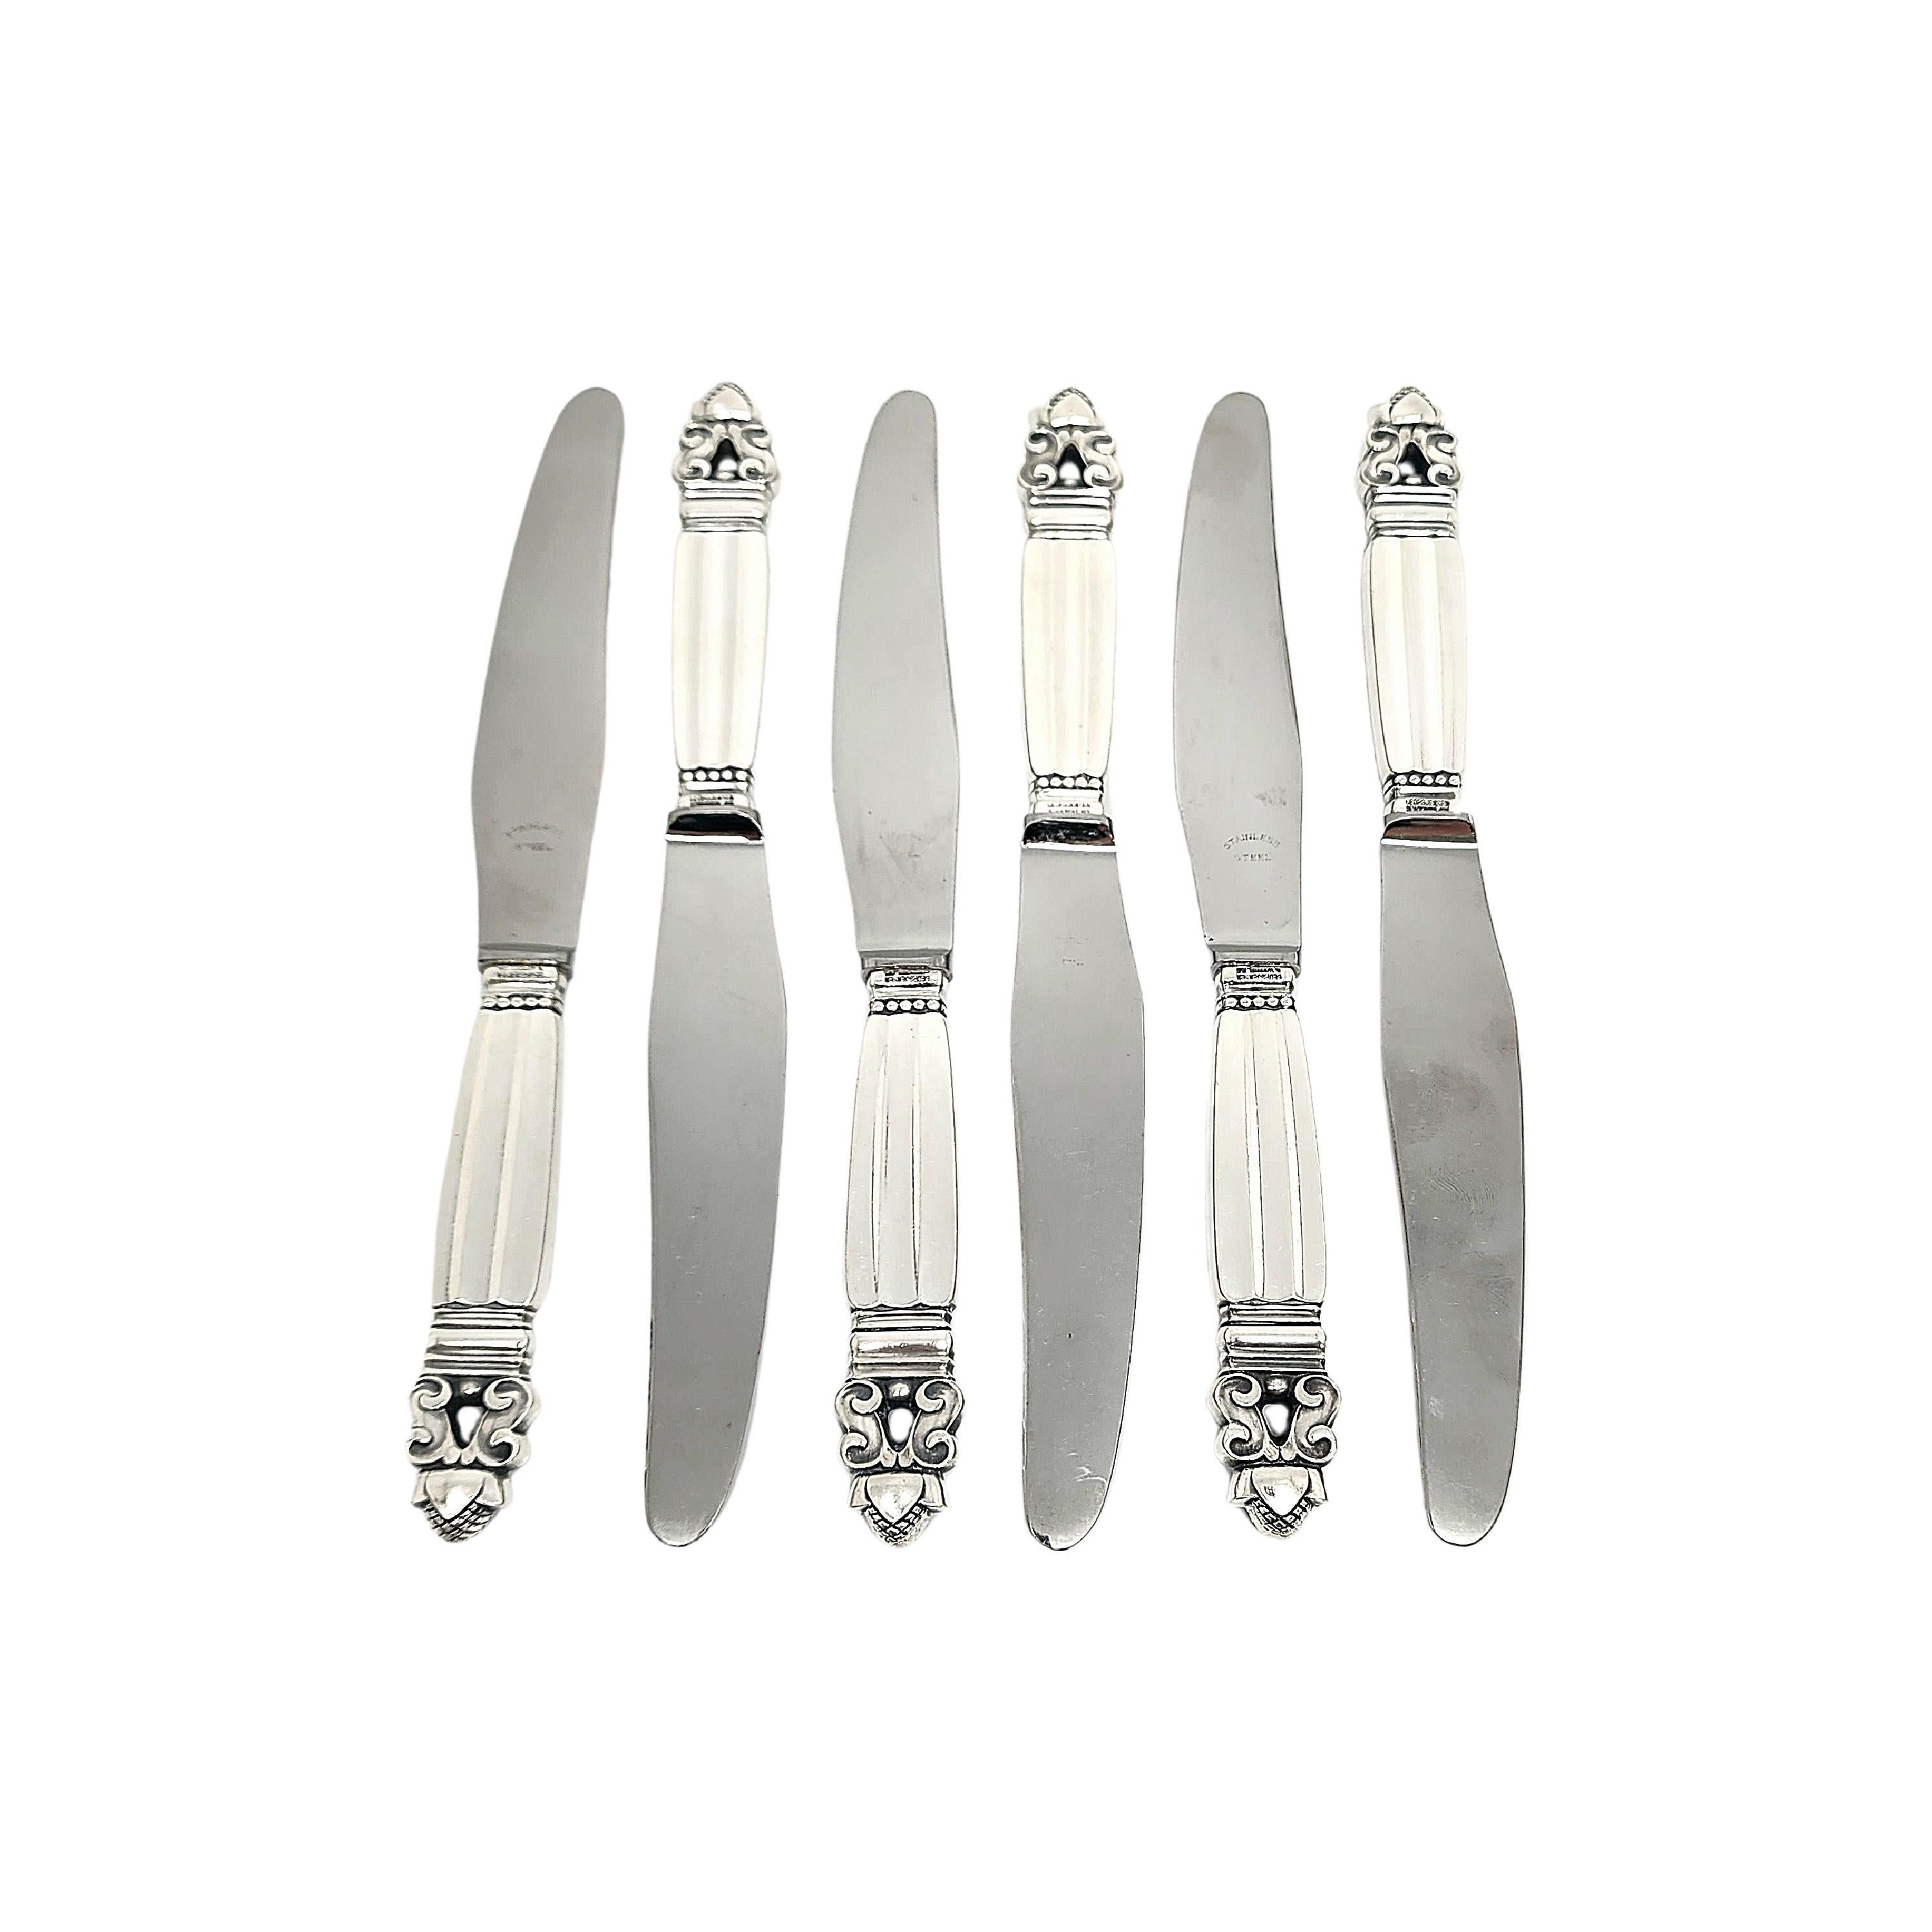 Set of 6 sterling silver handle stainless blade knives in the Acorn pattern by Georg Jensen.

The Acorn pattern was introduced in 1915 as a collaboration between Georg Jensen and designer Johan Ronde. The Acorn pattern, which combines Art Nouveau